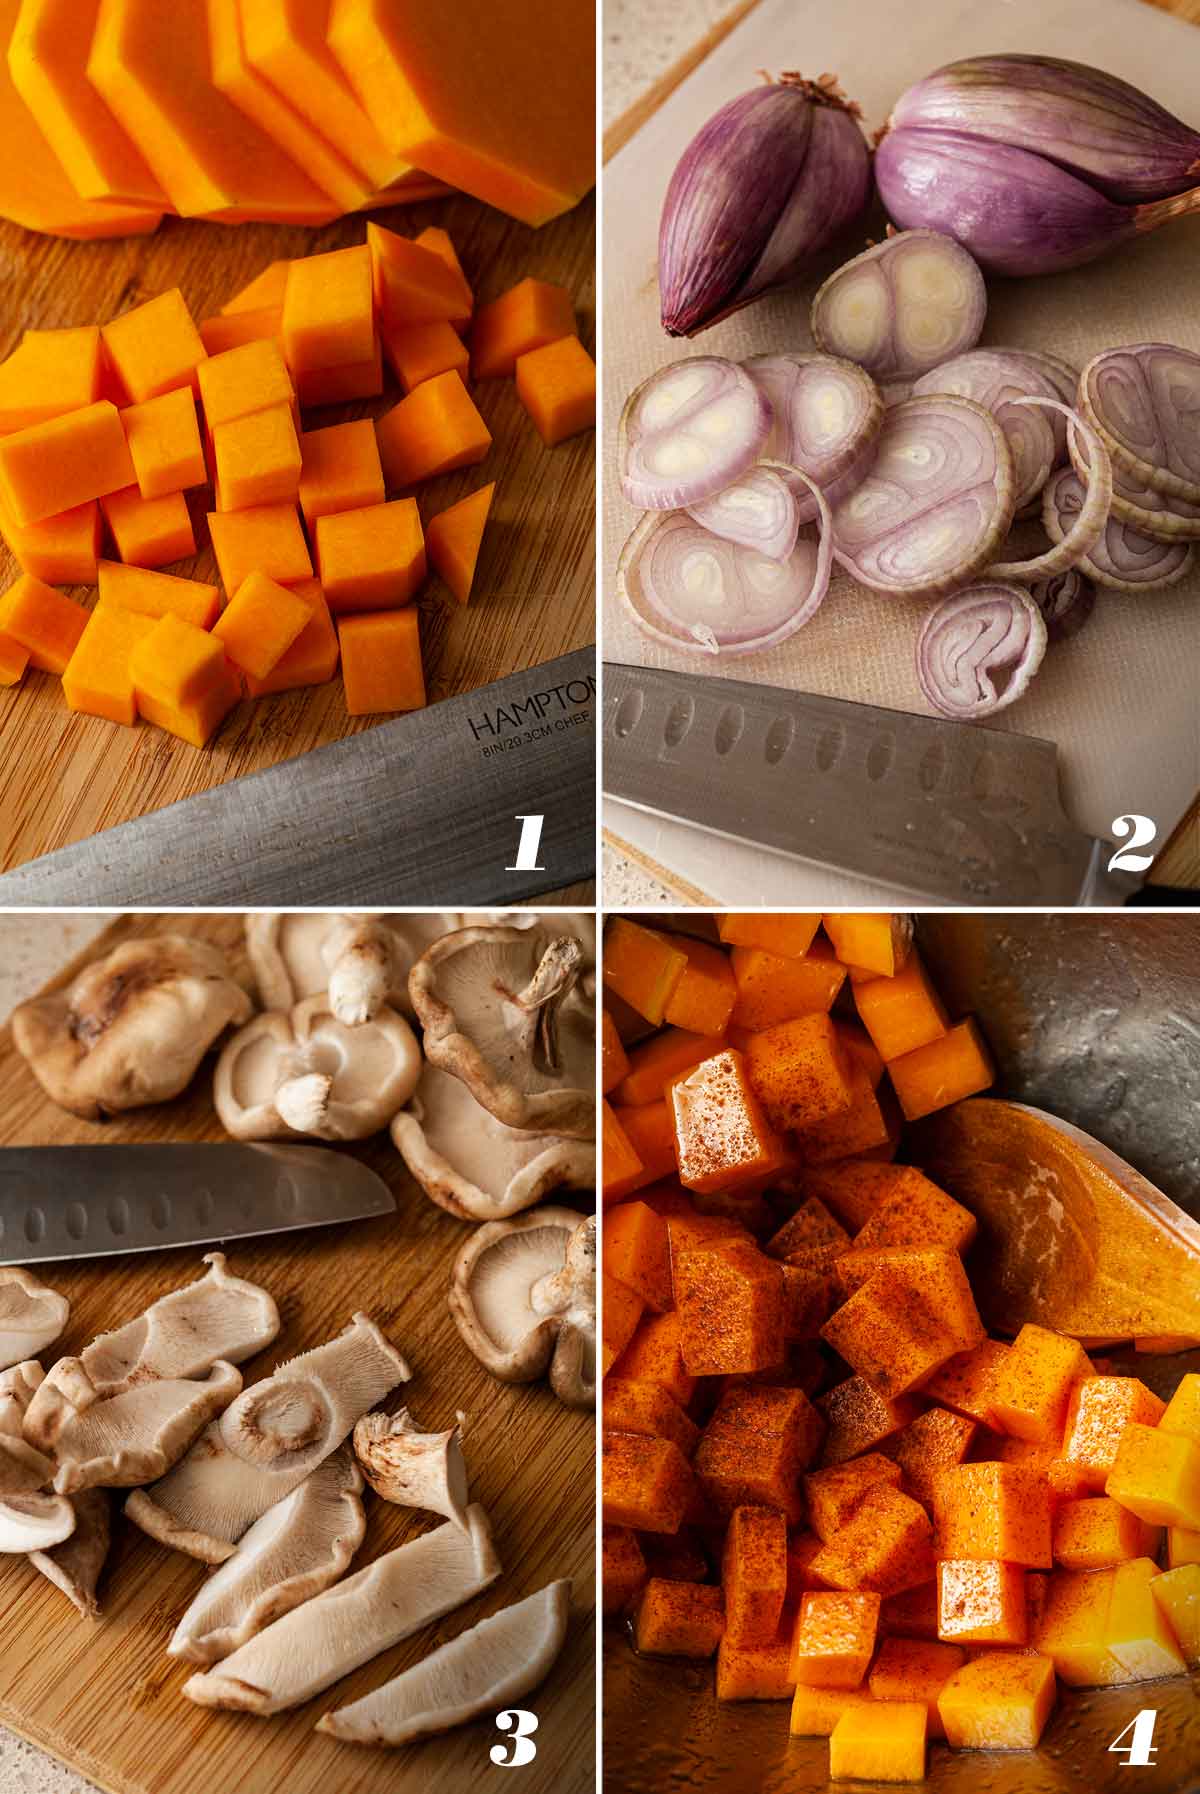 A collage of 4 numbered images showing how to prepare vegetables.